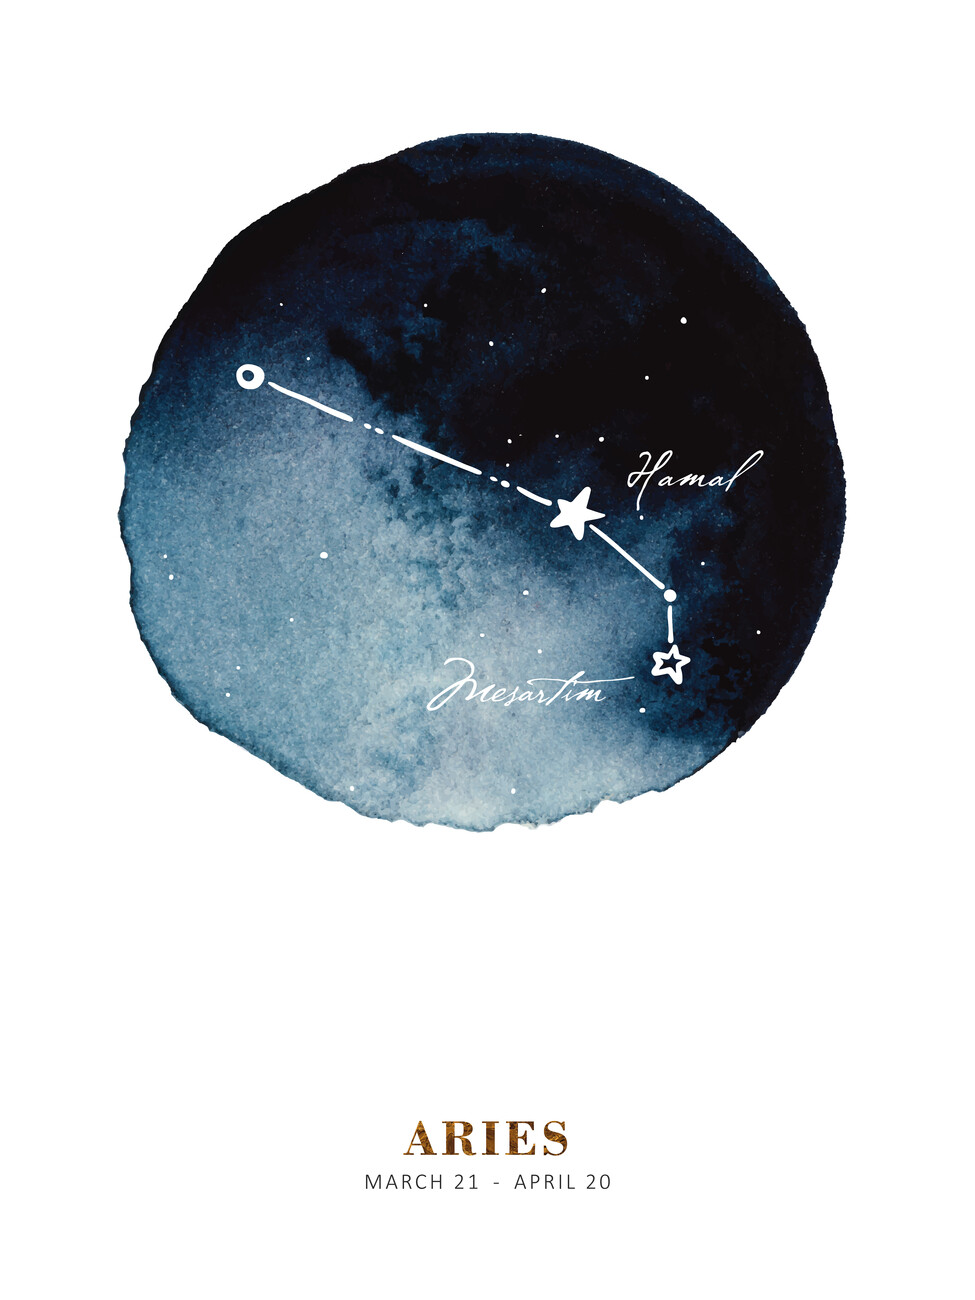 Aries March 21 - April 20, Aries is the first astrological sign in the zodiac, associated with the constellation of Aries. It is a fire sign and is associated with the elements air and fire. Aries is known for its bold, independent and energetic personality traits.  - Aries